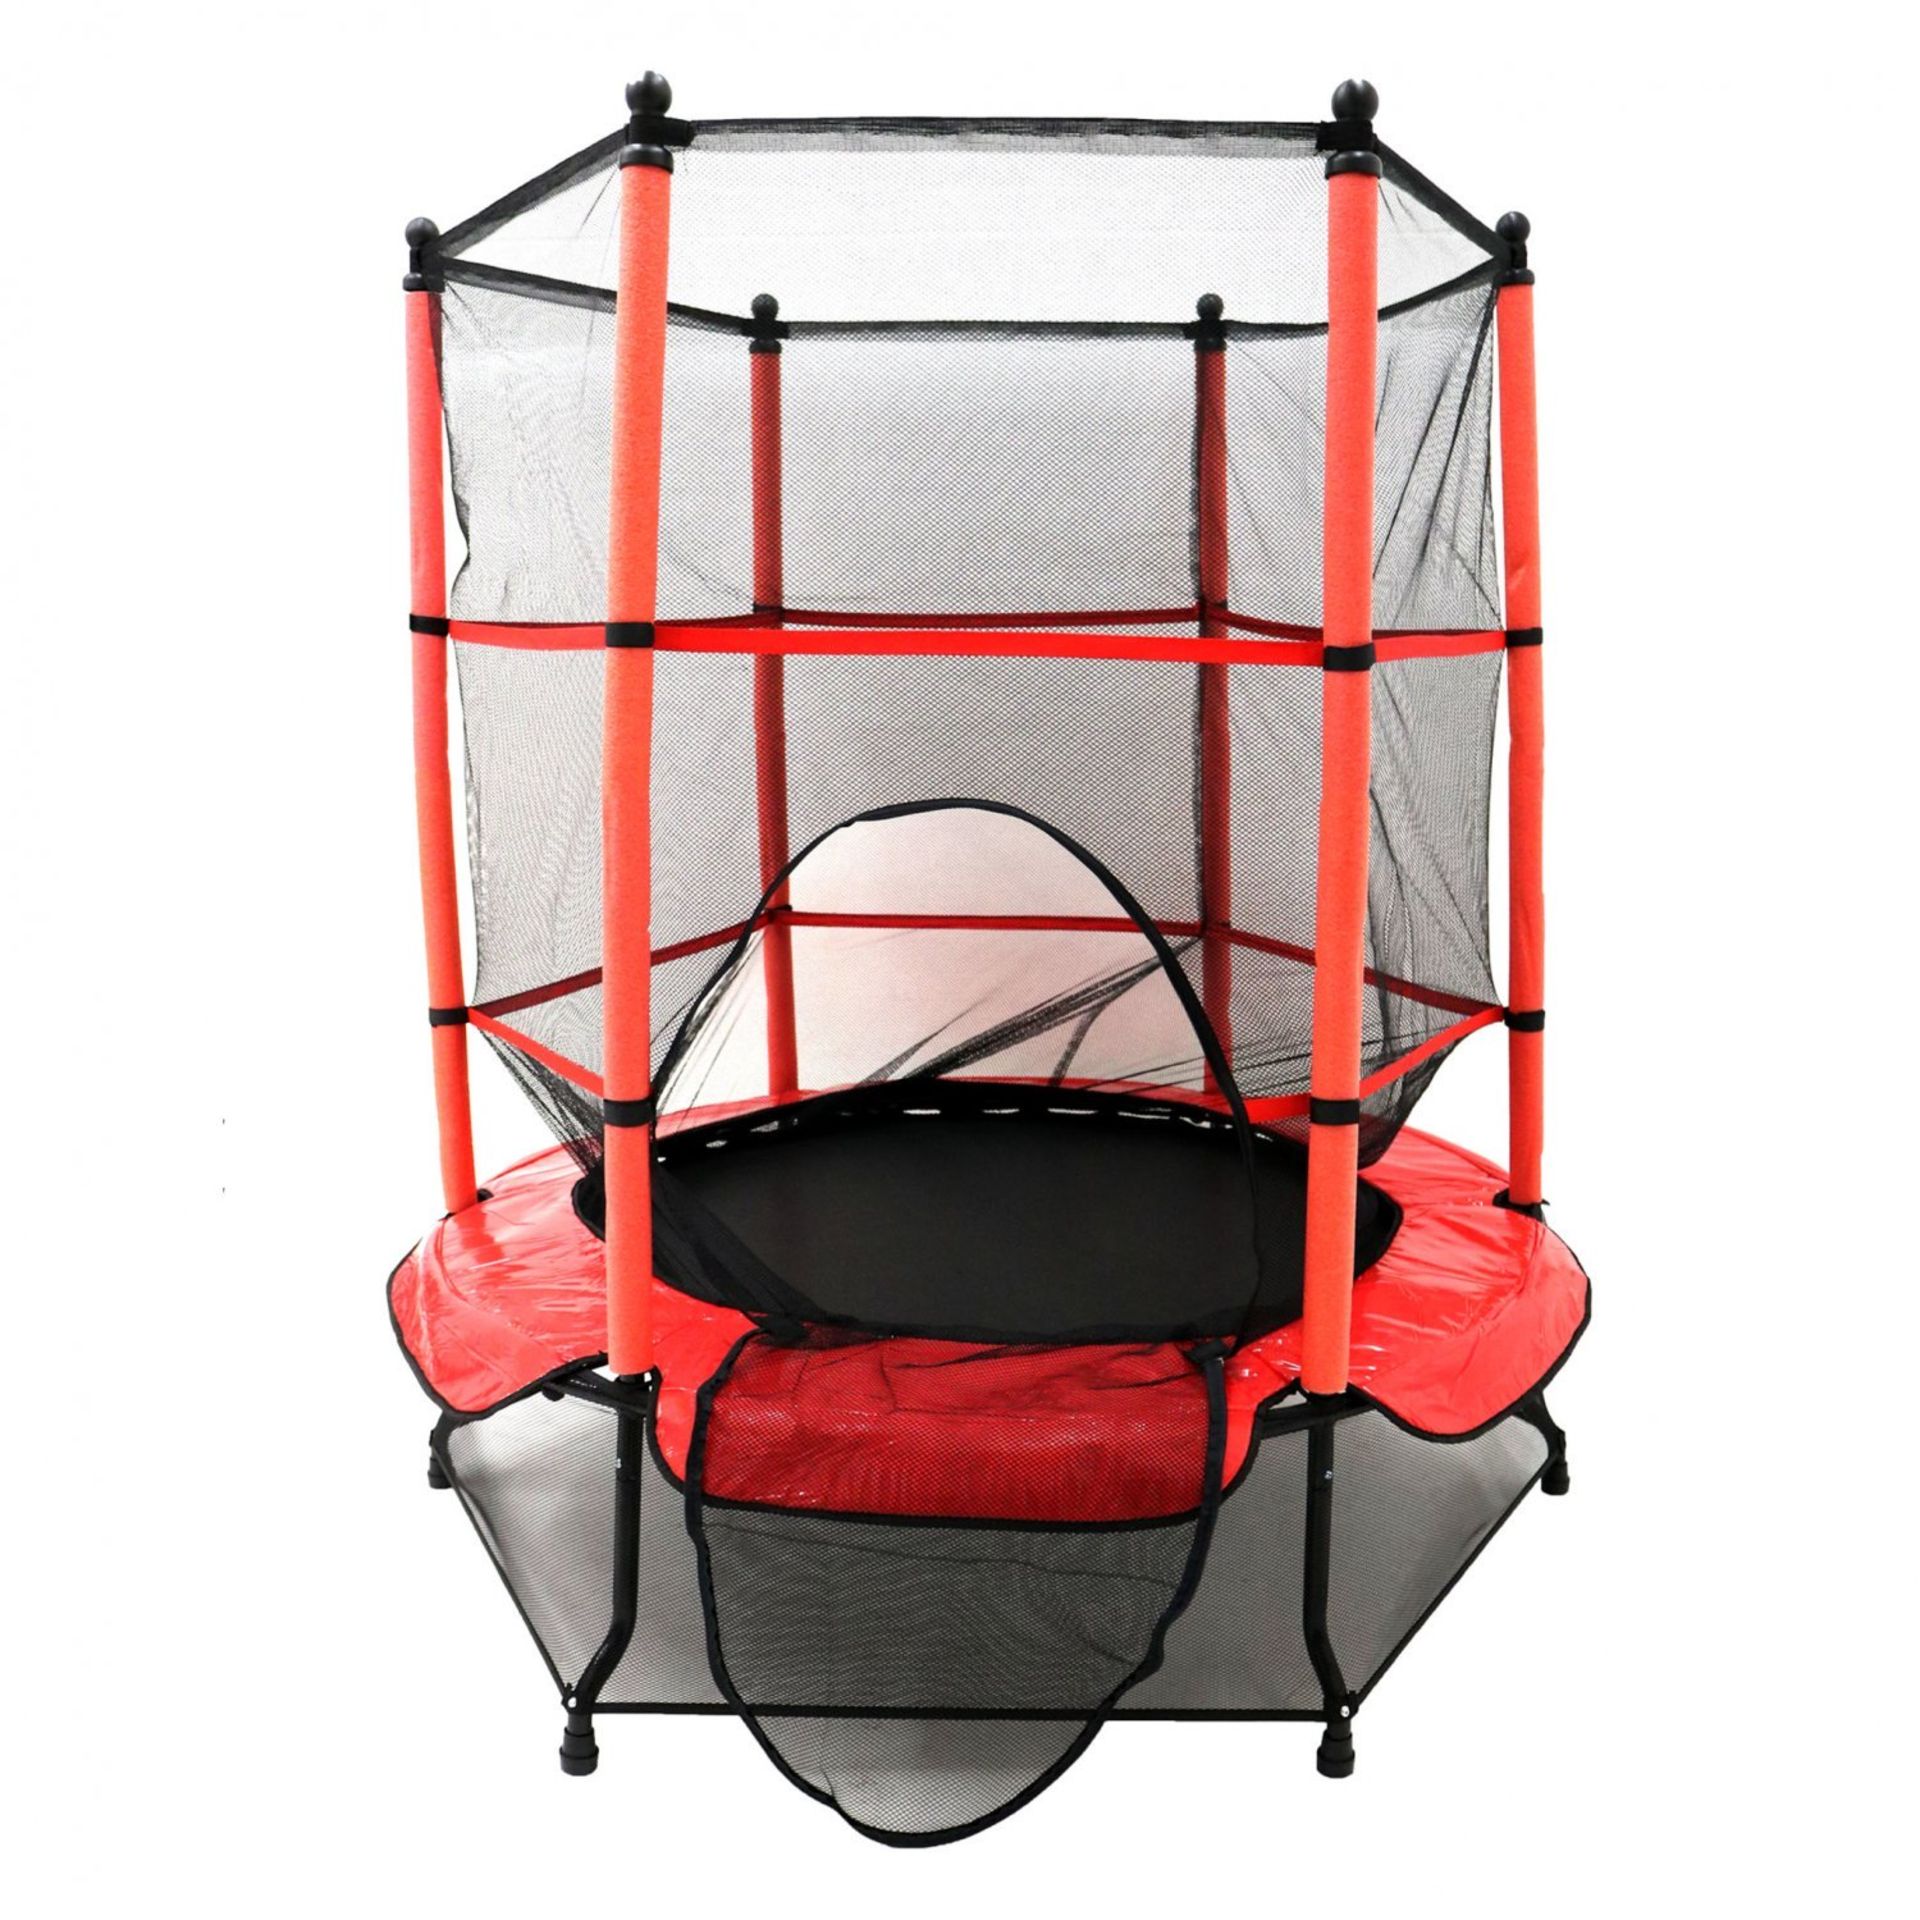 (SP479) 55" Kids Trampoline with Safety Net and Red Spring Cover Garden Outdoors This trampo... - Image 2 of 2